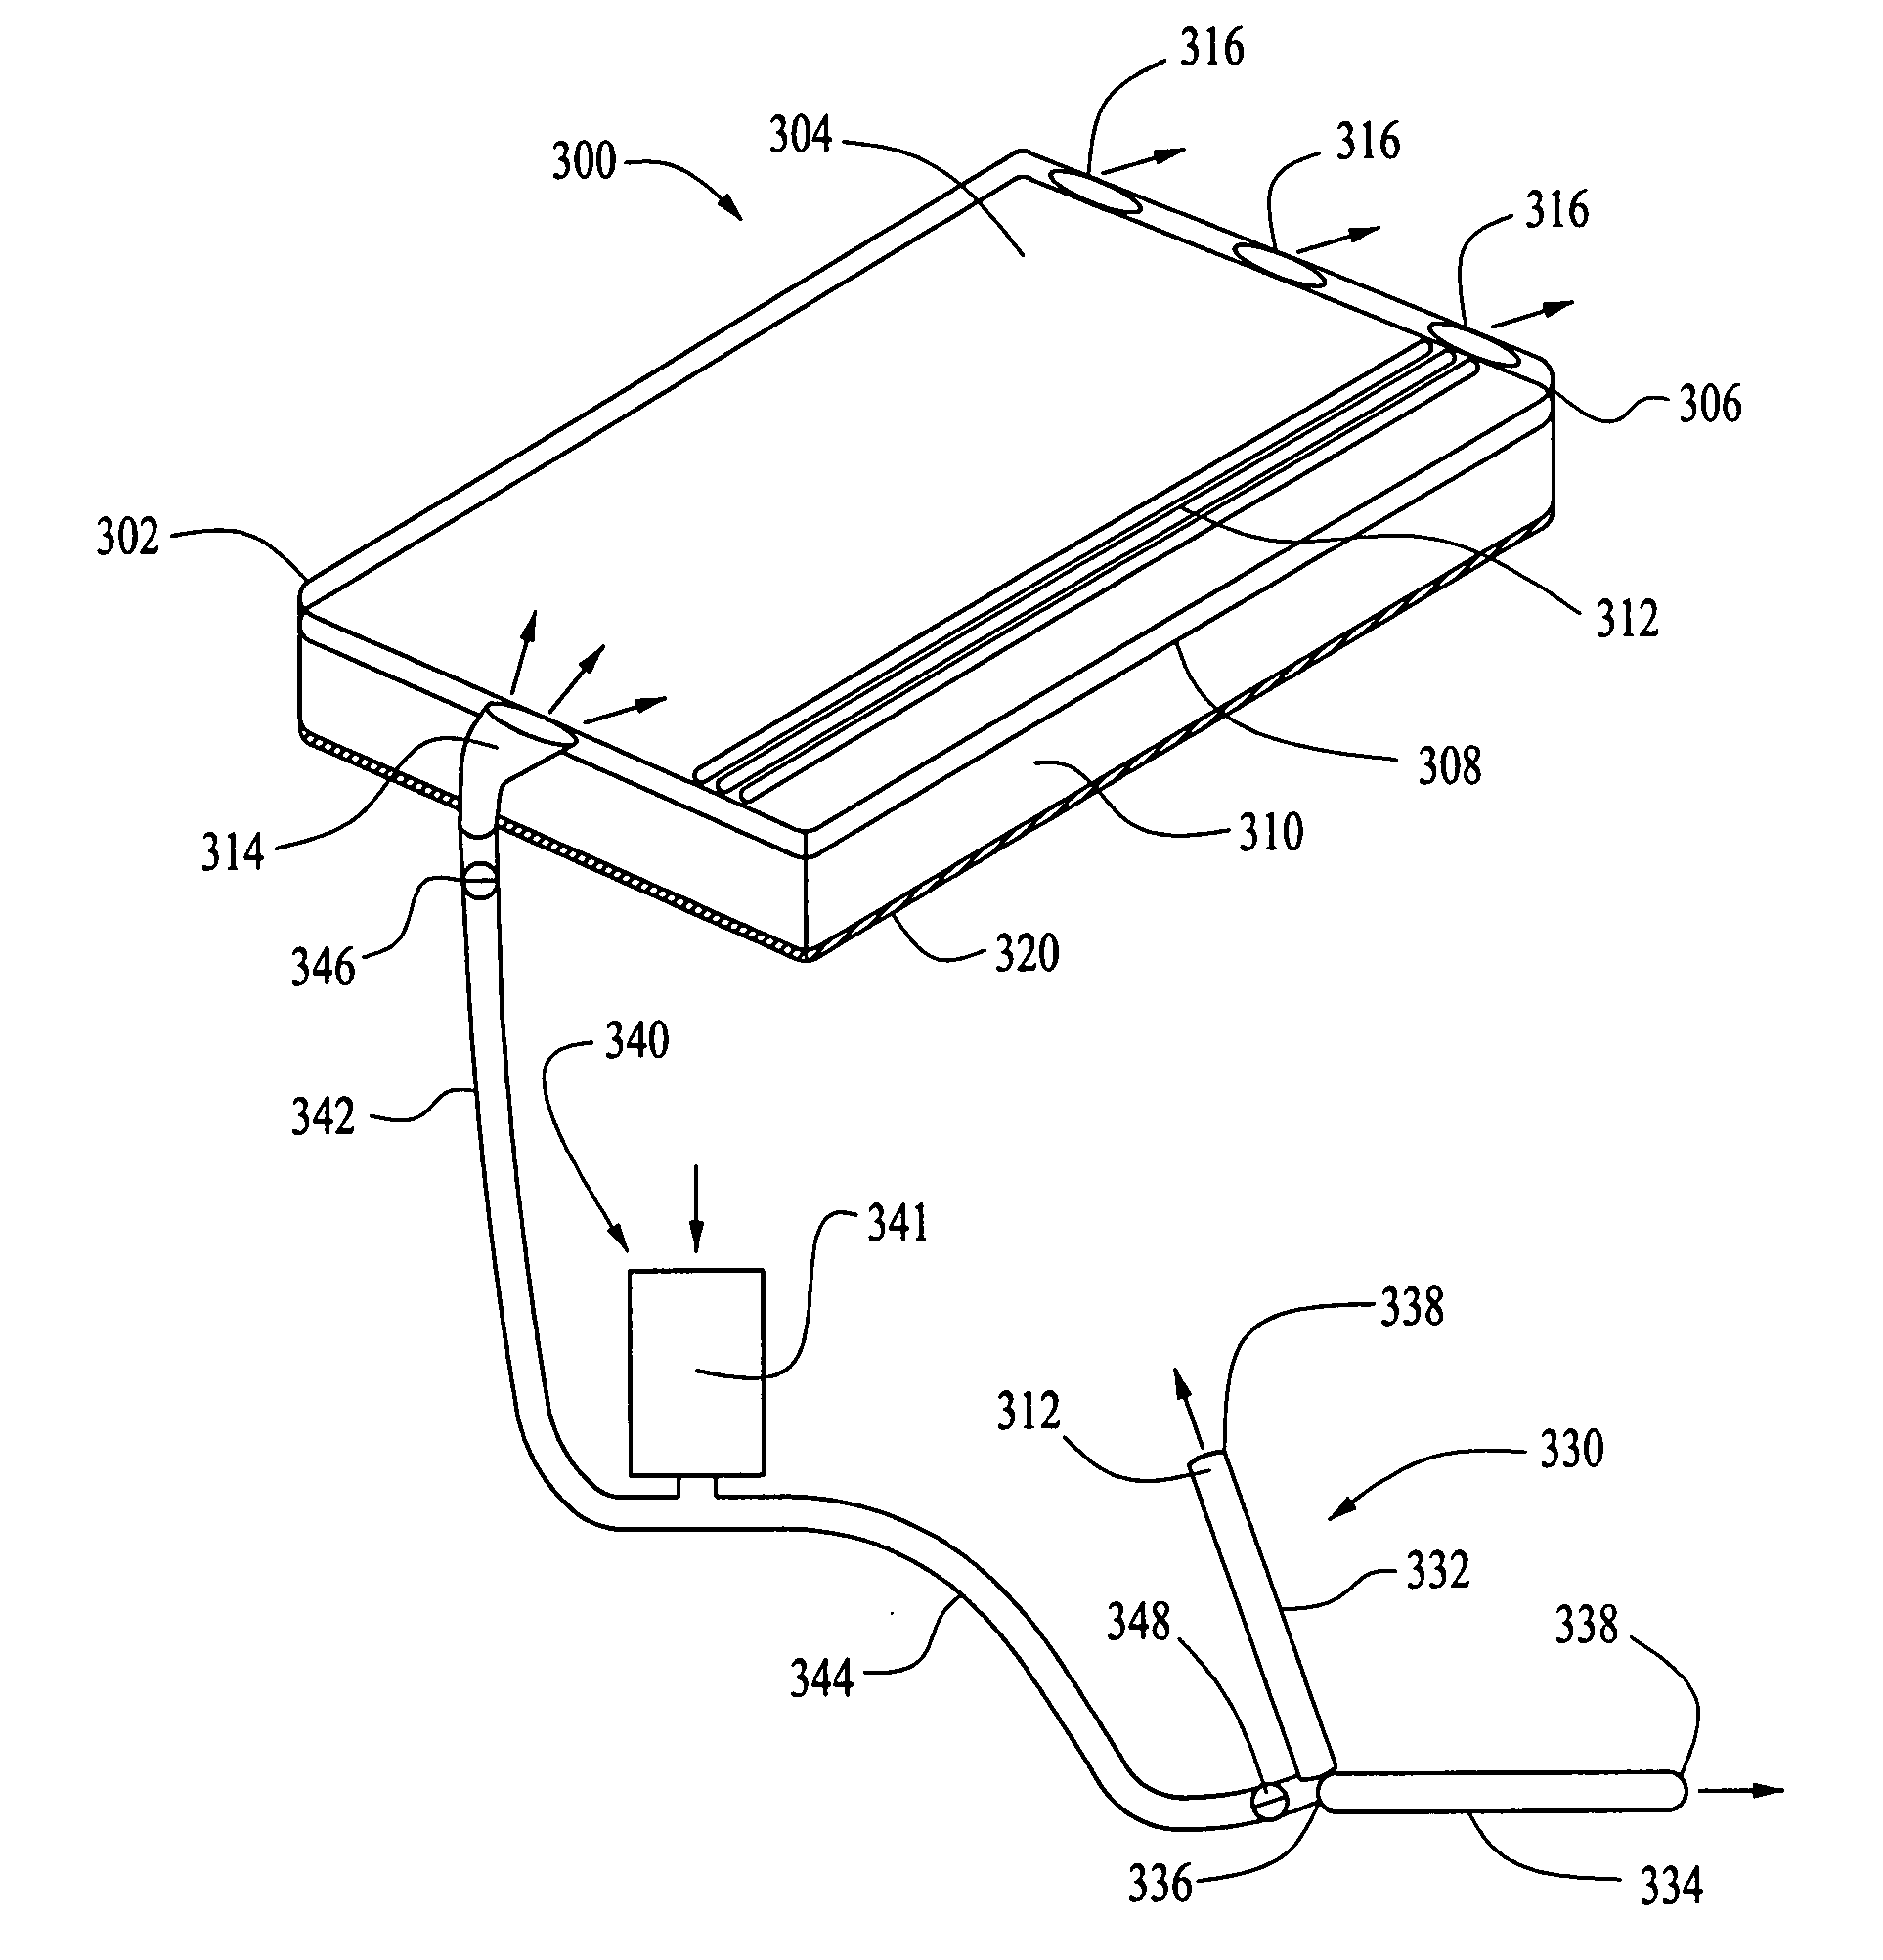 Multiple convective cushion seating and sleeping systems and methods